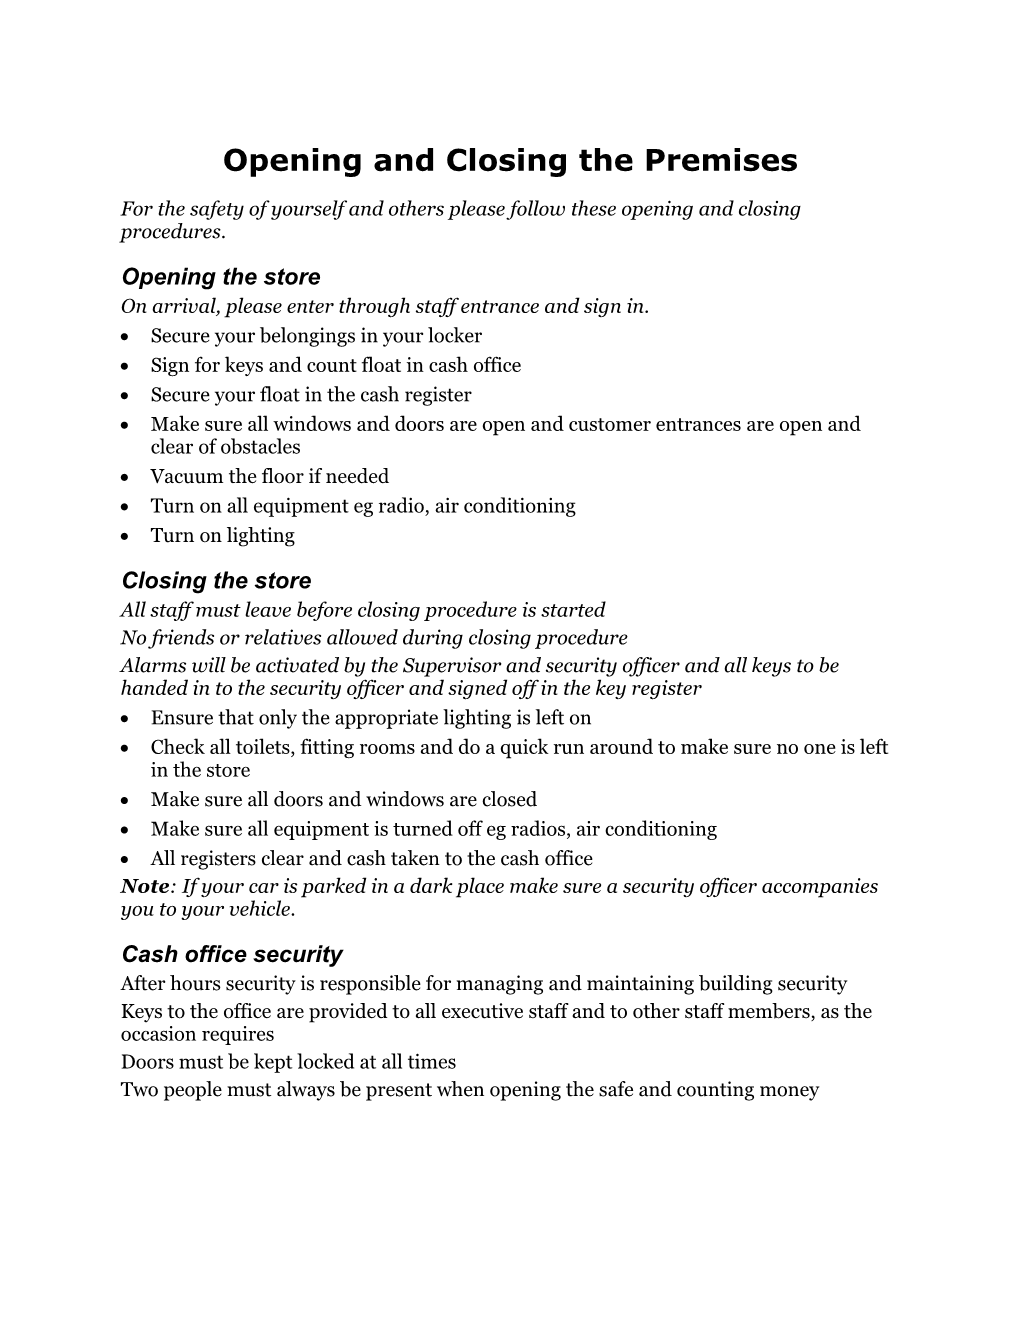 Opening and Closing of the Premises